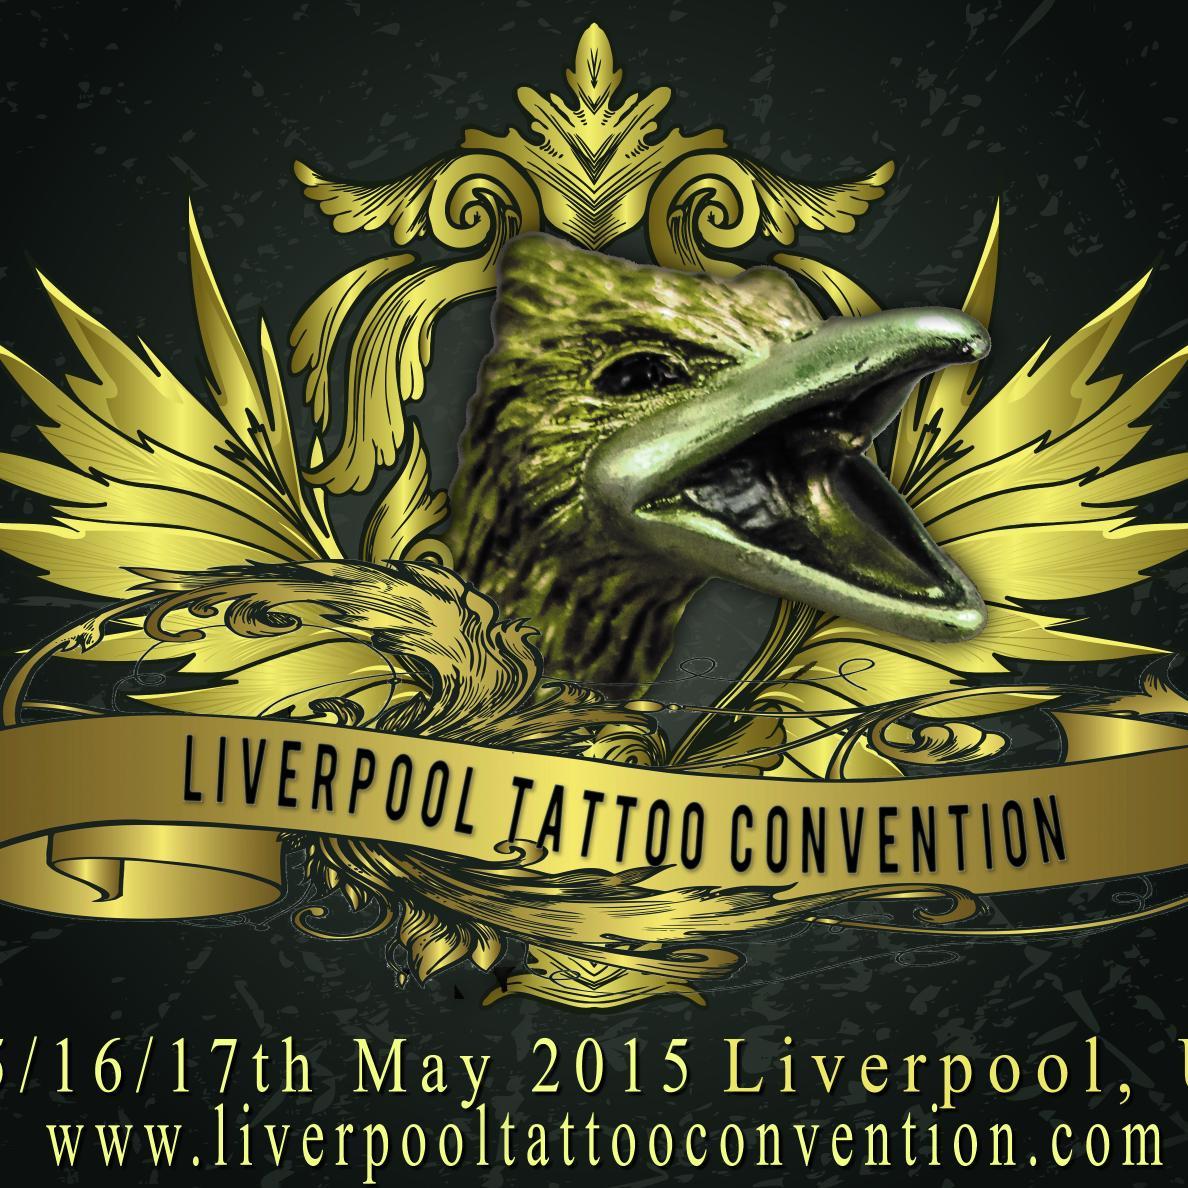 Liverpool Tattoo Convention 250+ Tattoo Artists, Traders, Ents and more 3-5th May 2013 http://t.co/T4JTSUZK5u